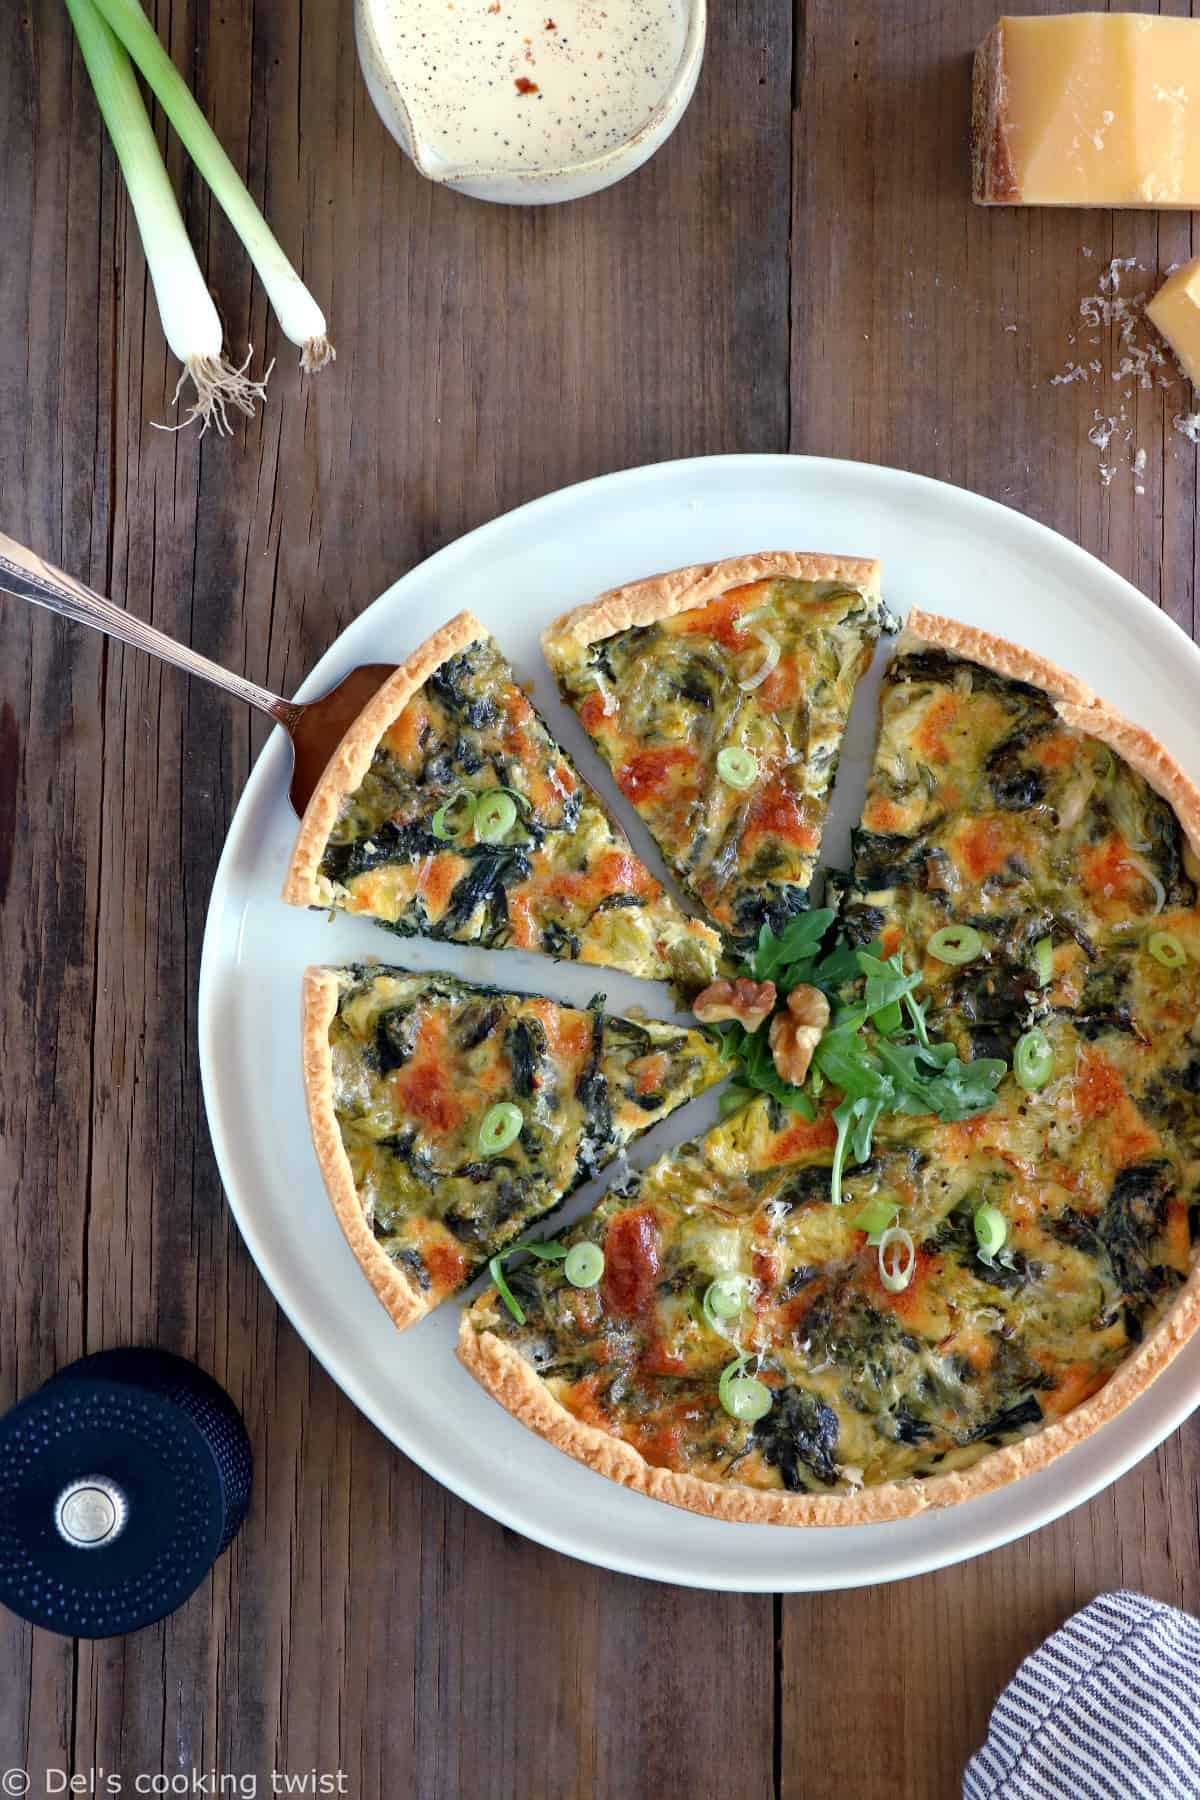 French leek quiche is a classic winter weeknight dinner in France. Plant-based and prepared with Comté cheese, this dish is full of comforting flavors.